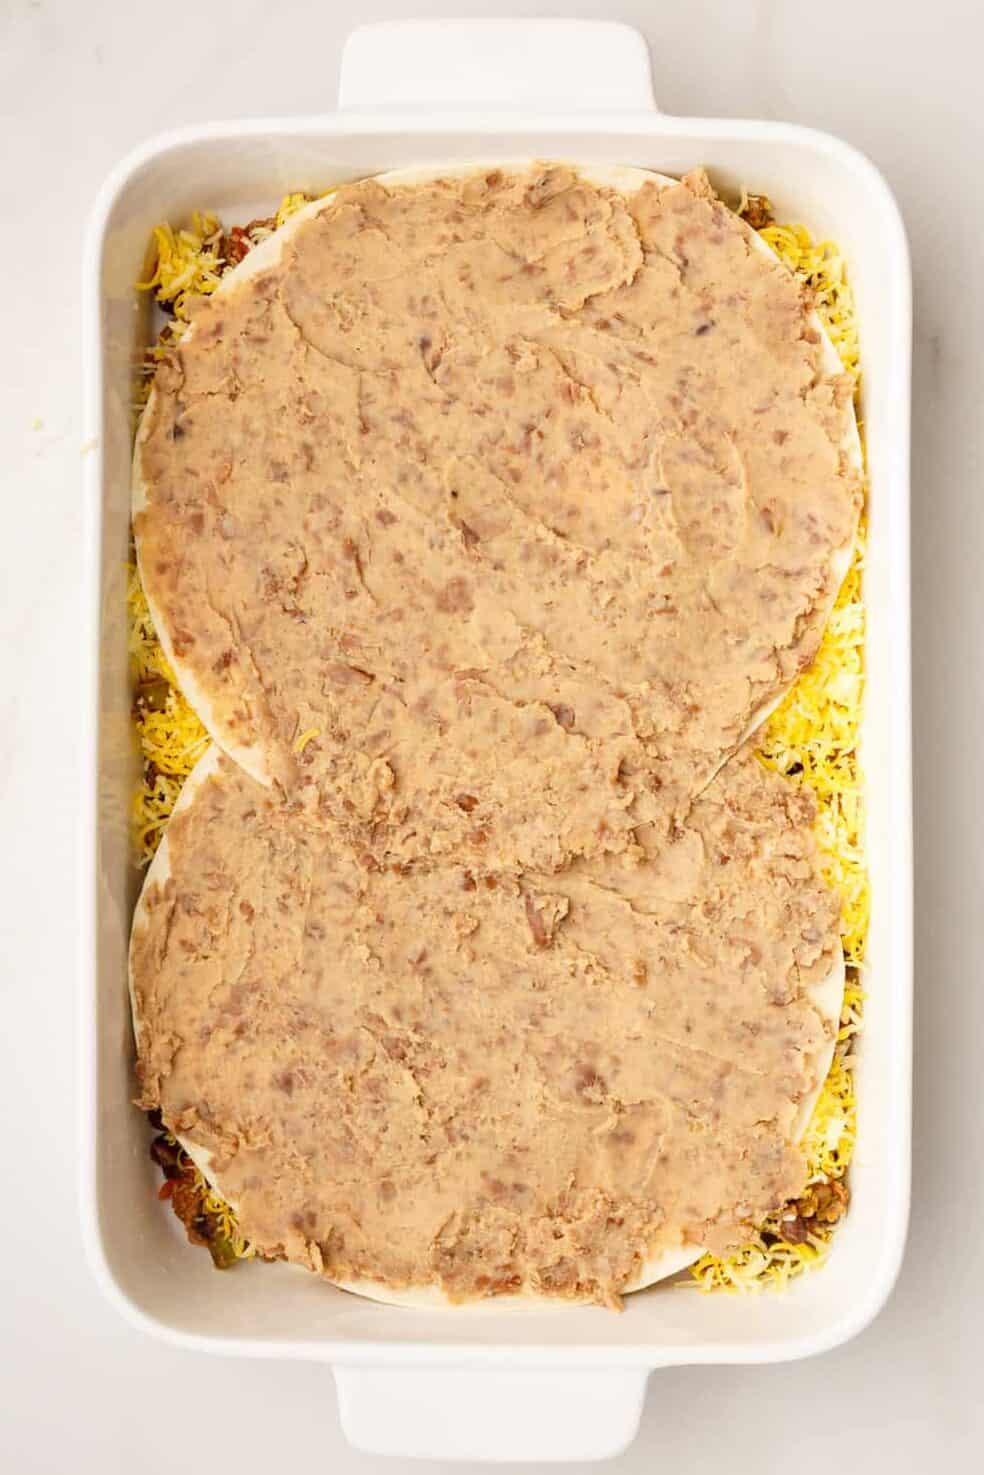 9x13 casserole dish with unbaked taco lasagna. the image shows two tortillas layered with smashed black beans.